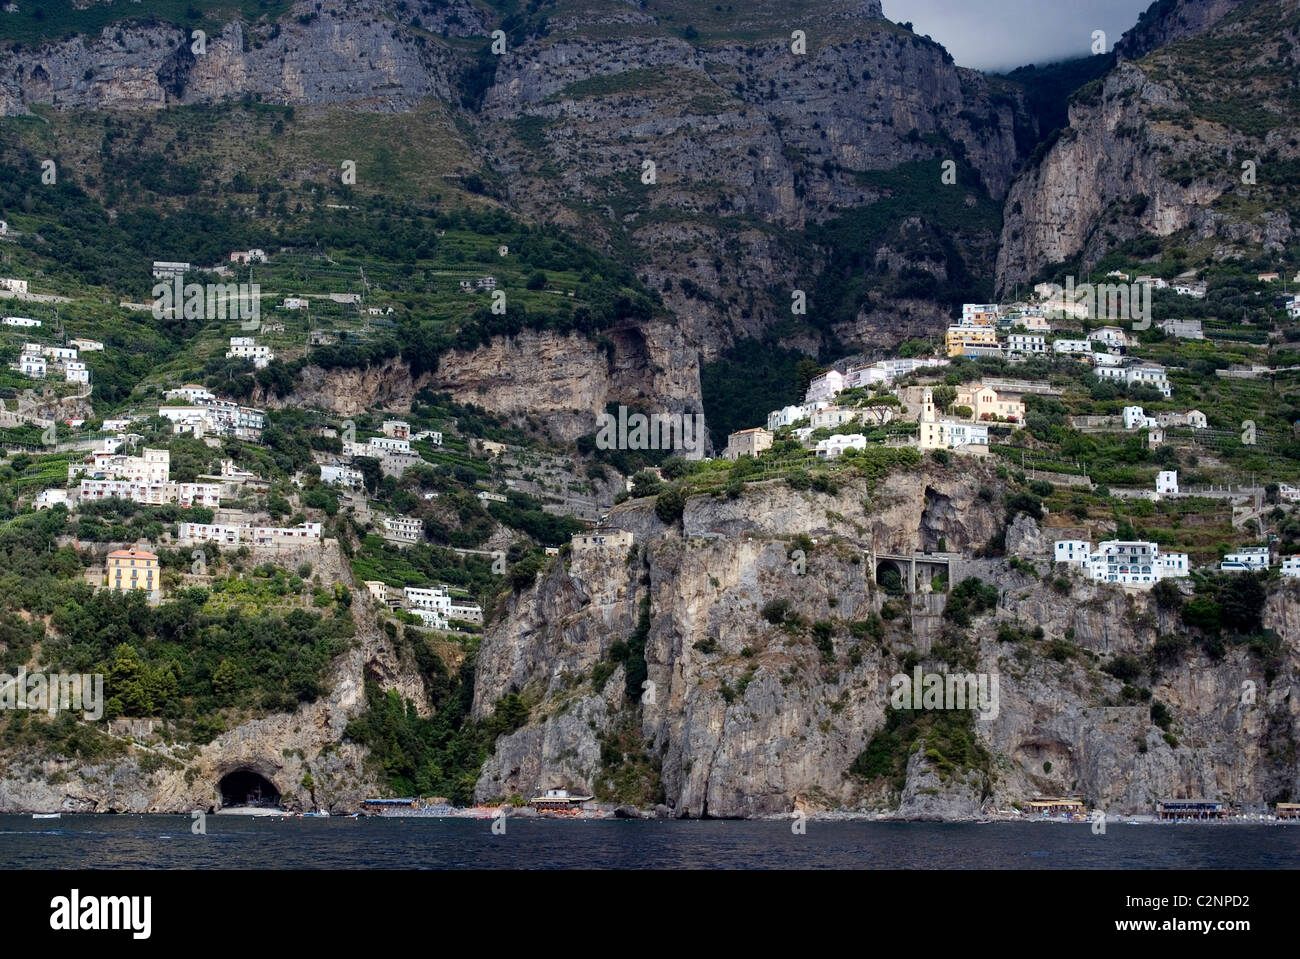 View of the hillside houses, hotels and waterside residences of the Amalfi Coast, Campania, Italy Stock Photo